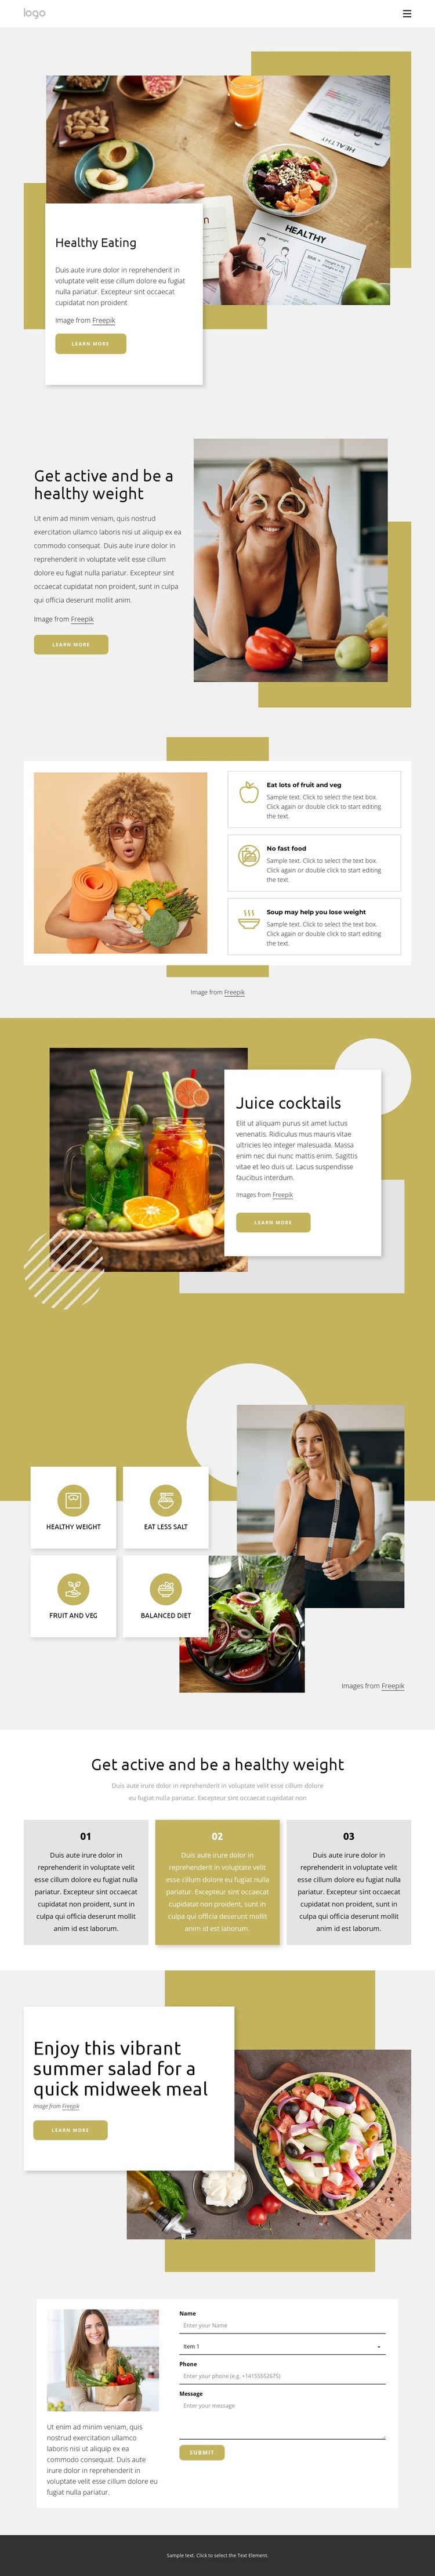 Focus on healthy eating Html Code Example